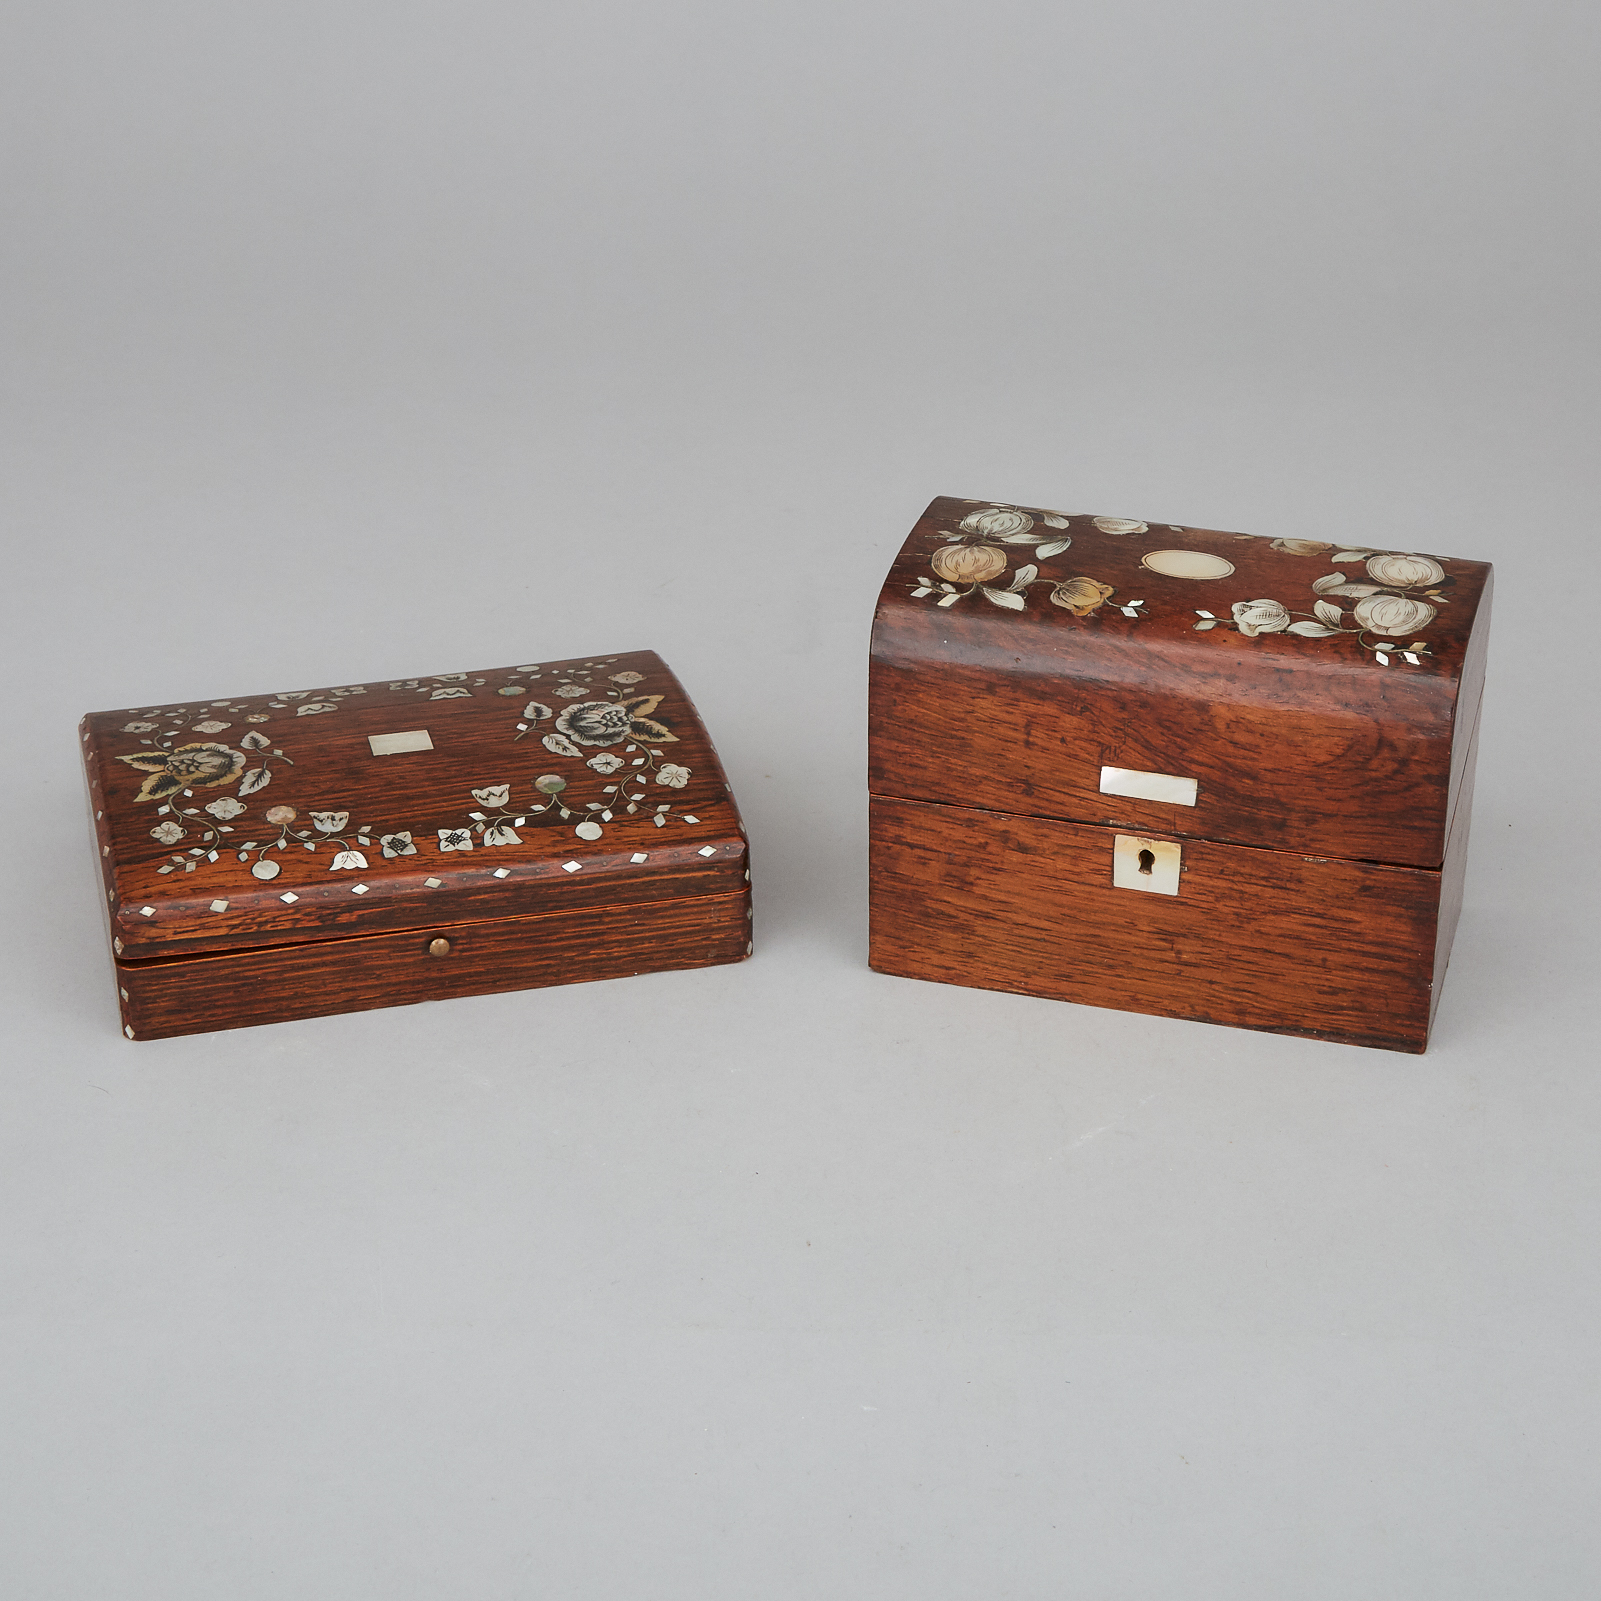 Two Victorian Rosewood Dresser Boxes, mid 19th century